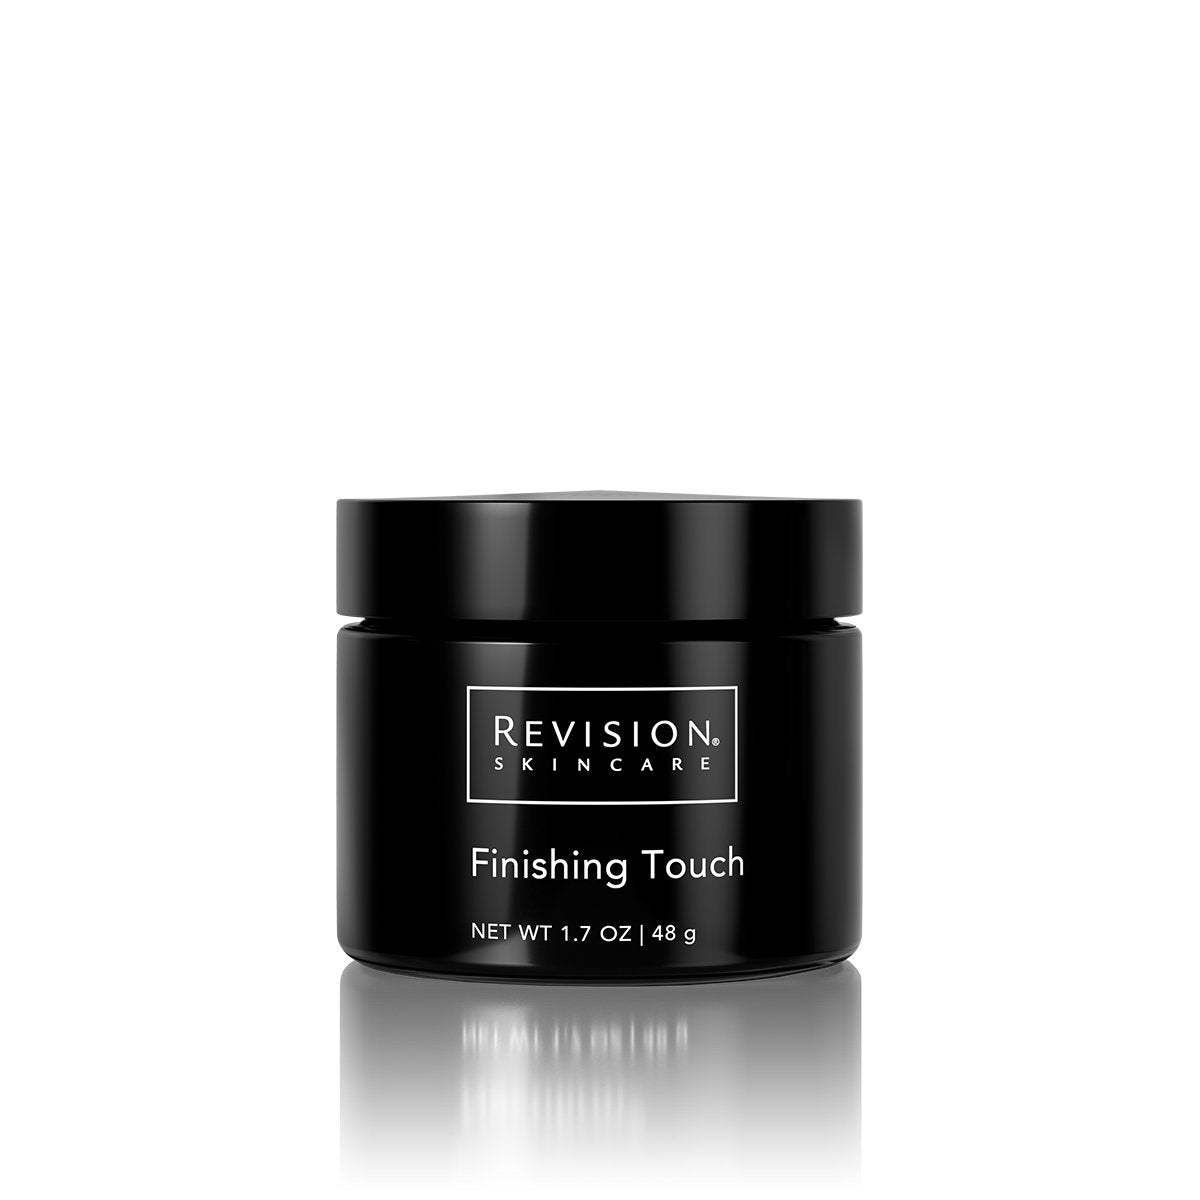 Revision Finishing Touch - Simply You Med Spa